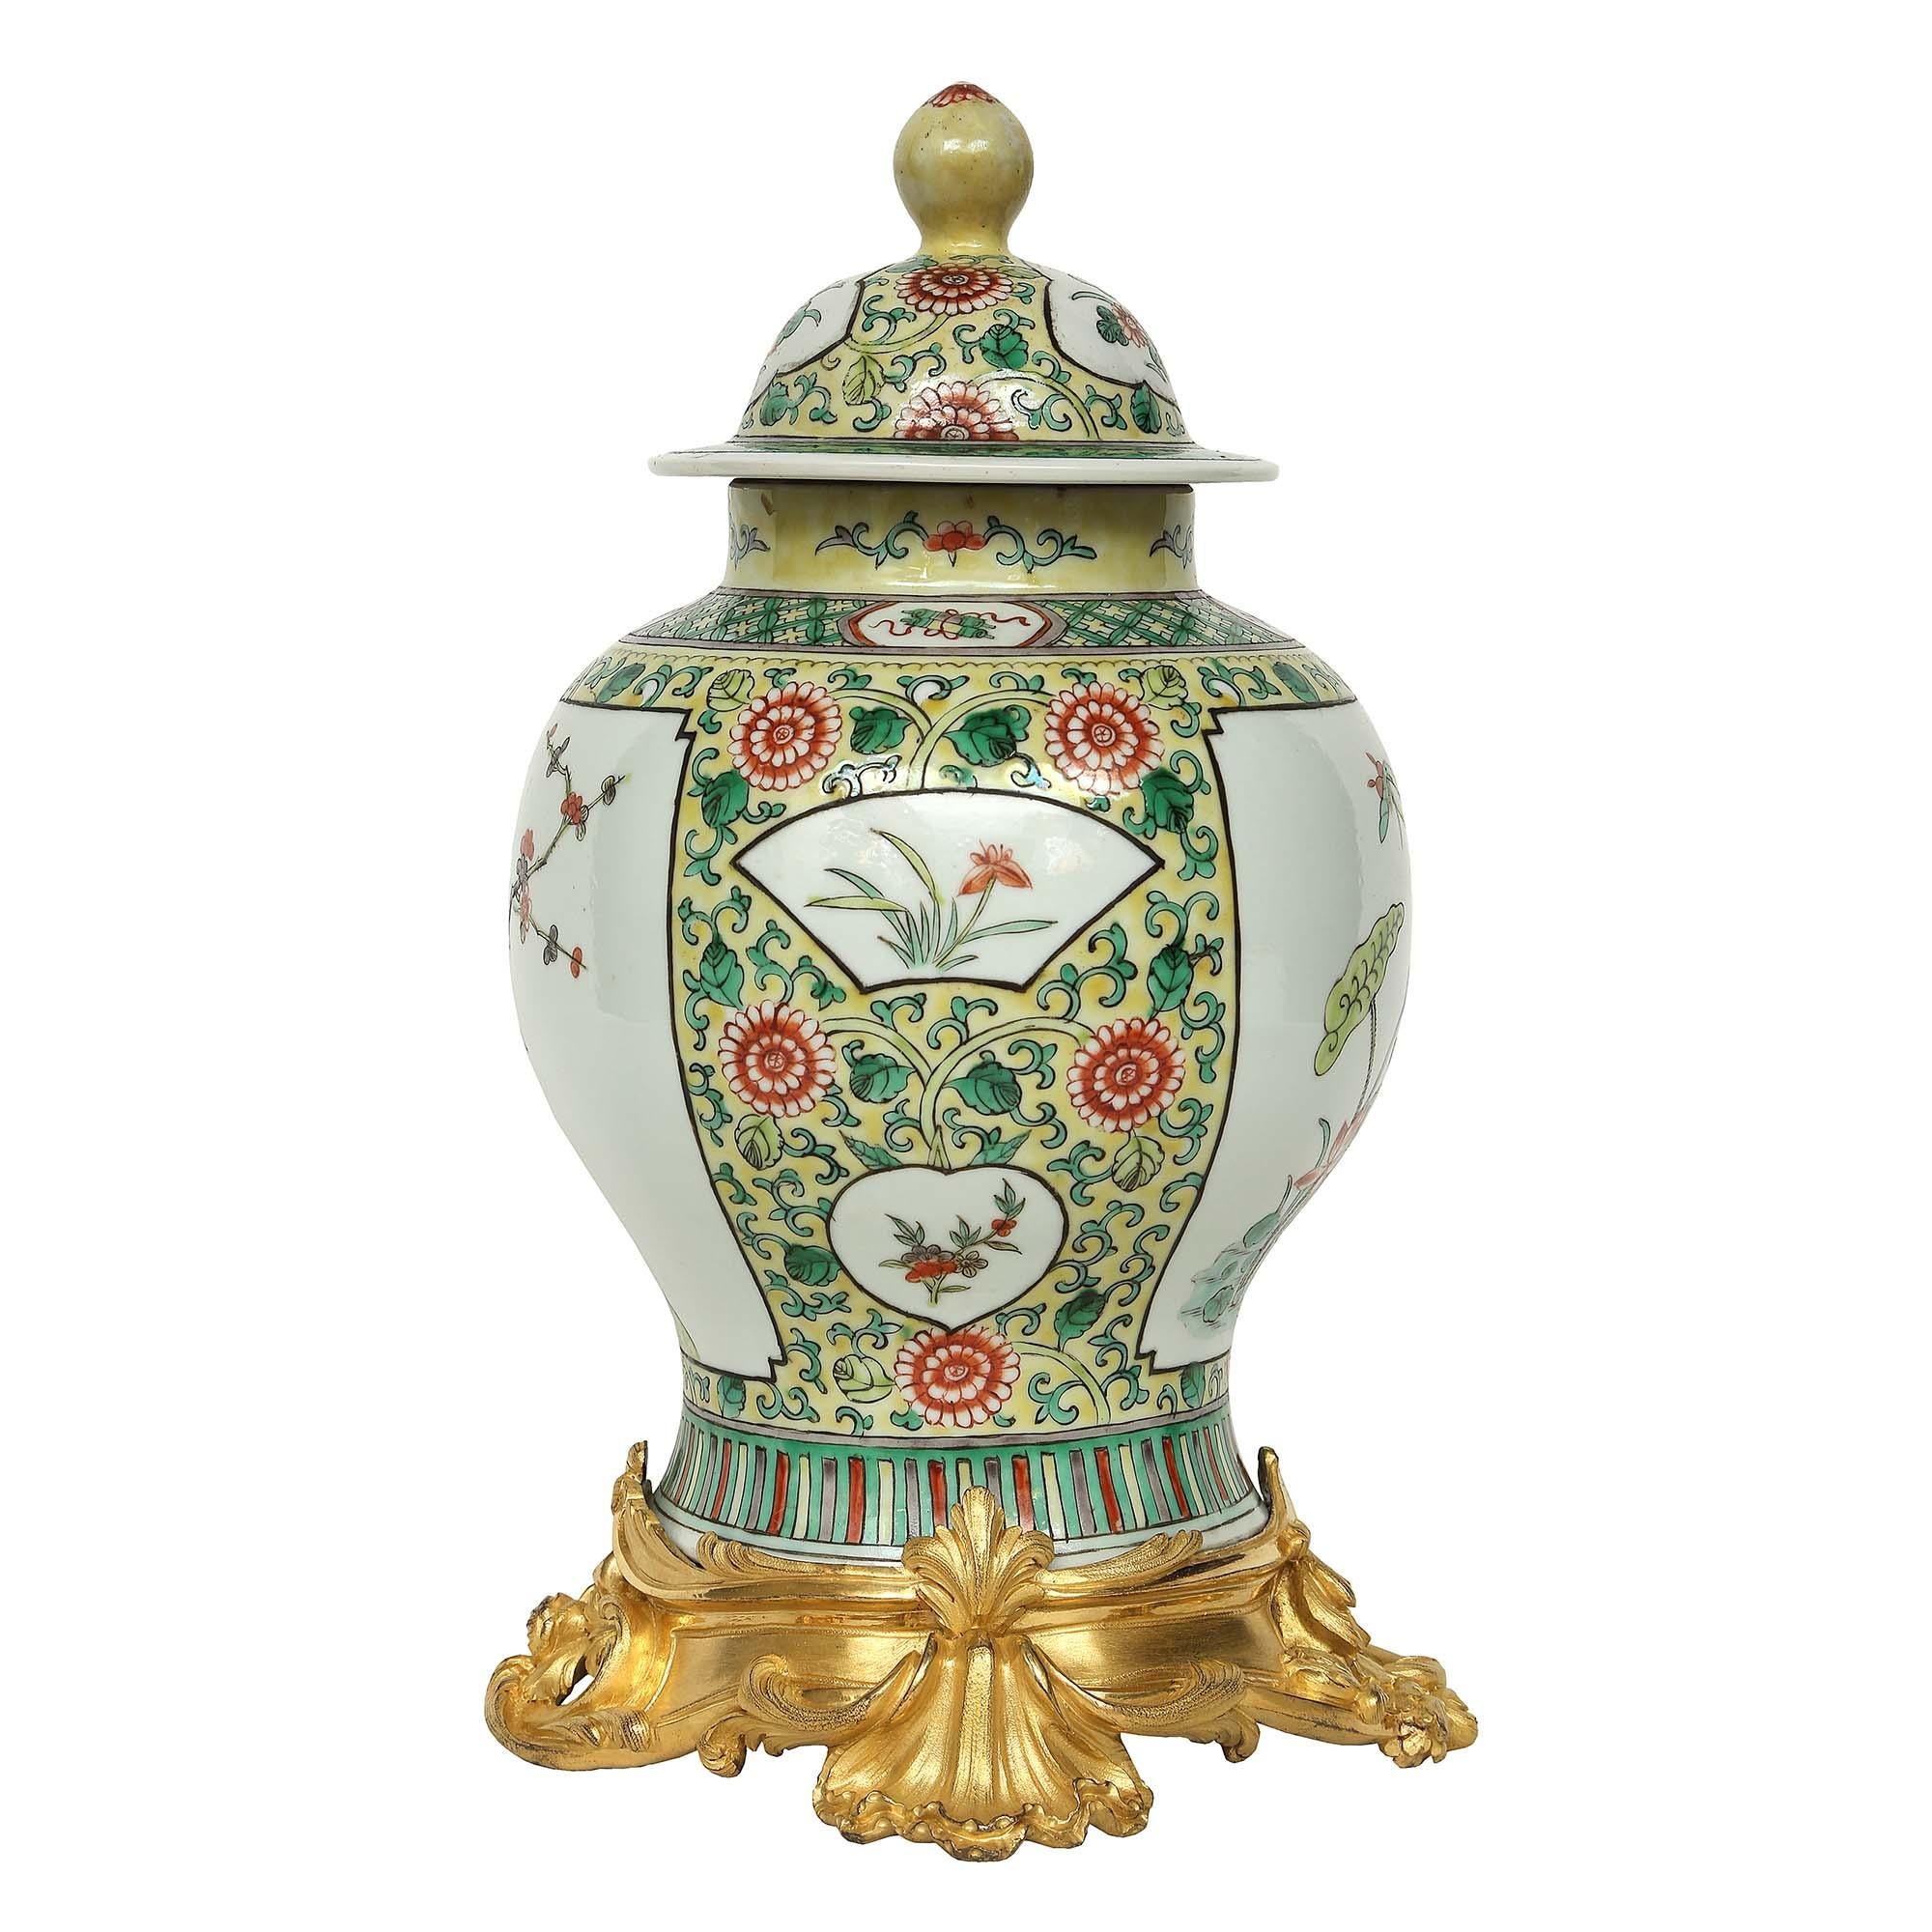 A very decorative 19th century Famille Verte Chinese porcelain lidded urn. The urn has a wonderful design of water lilies with butterflies and assorted foliage amidst a yellow background with a scrolled foliate design.

